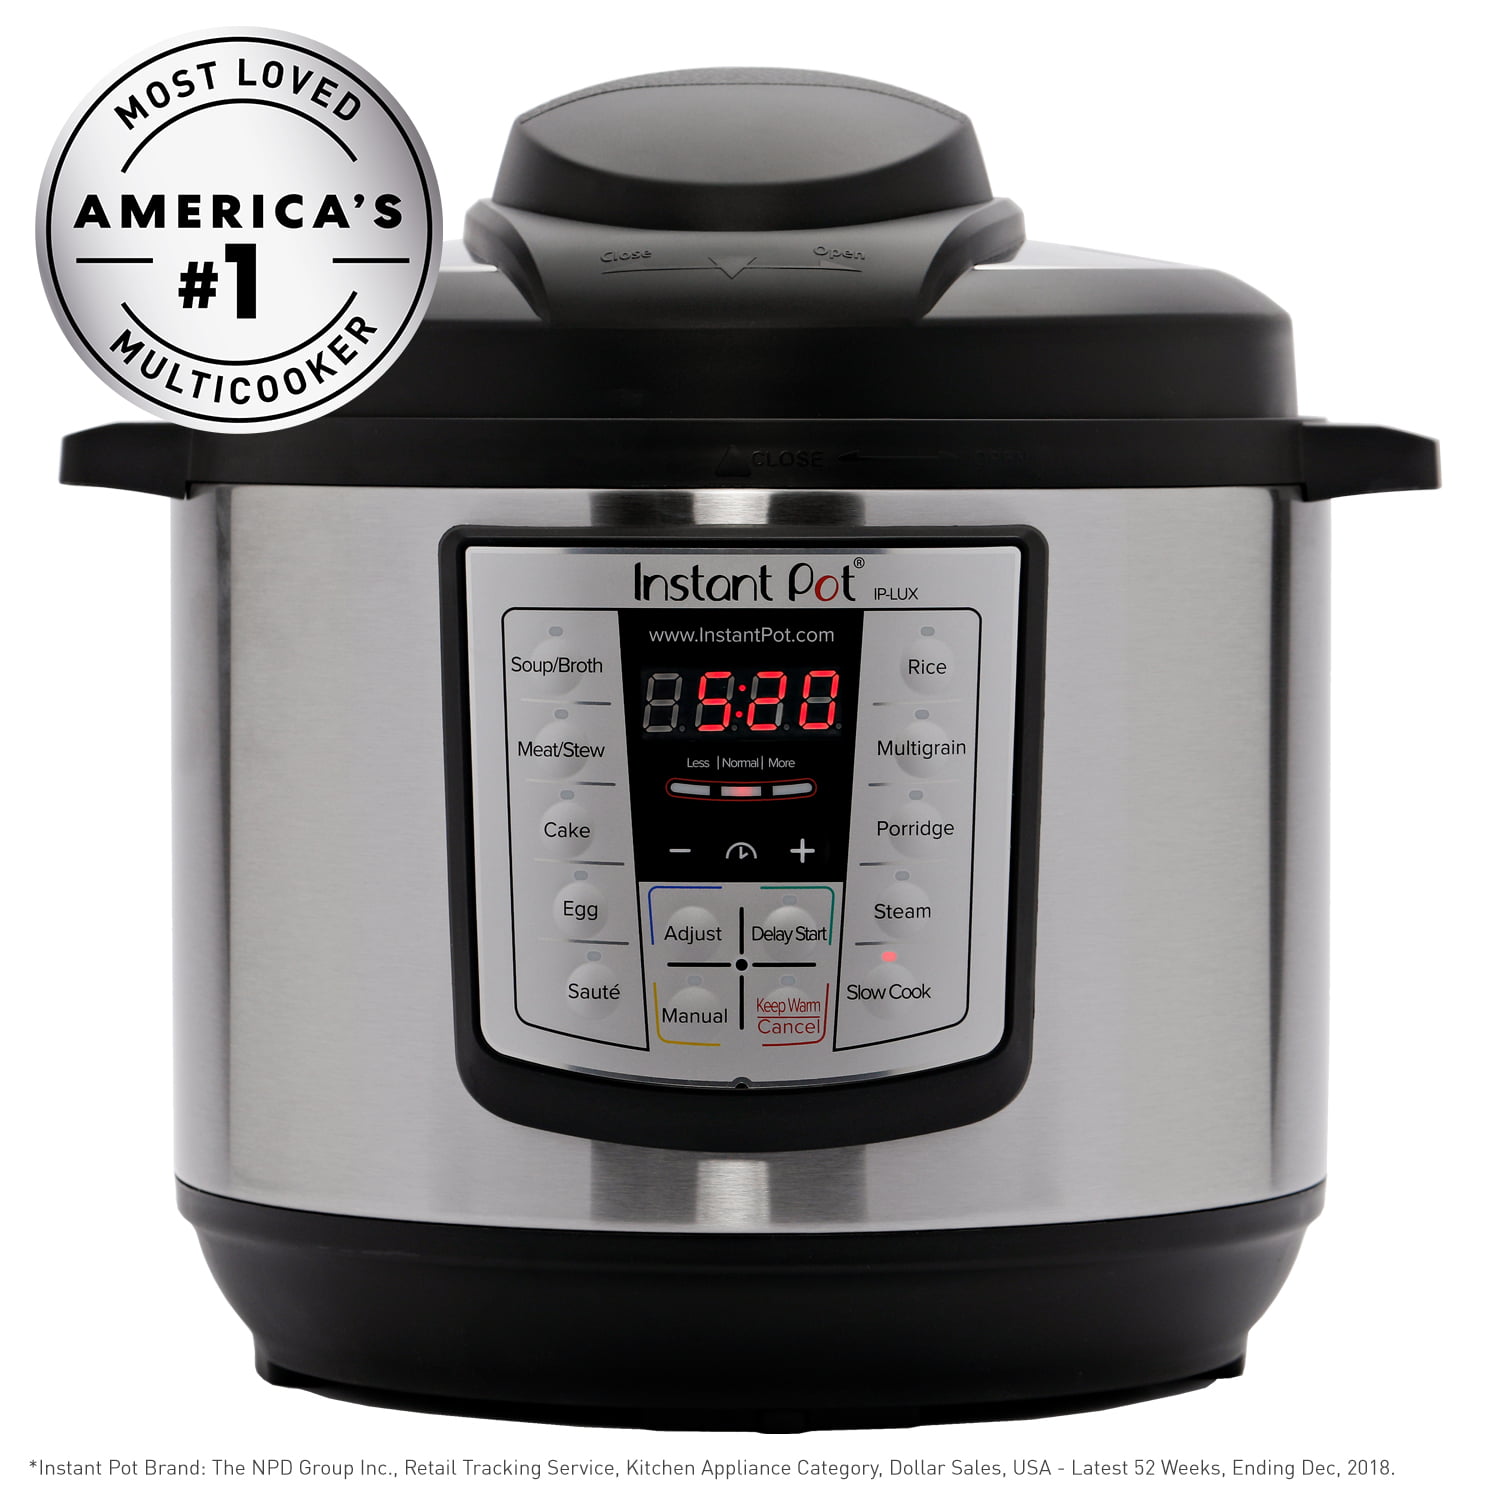 Disney Mickey Mouse Instant Pot Duo Multi Use 7 In 1 Pressure Cooker